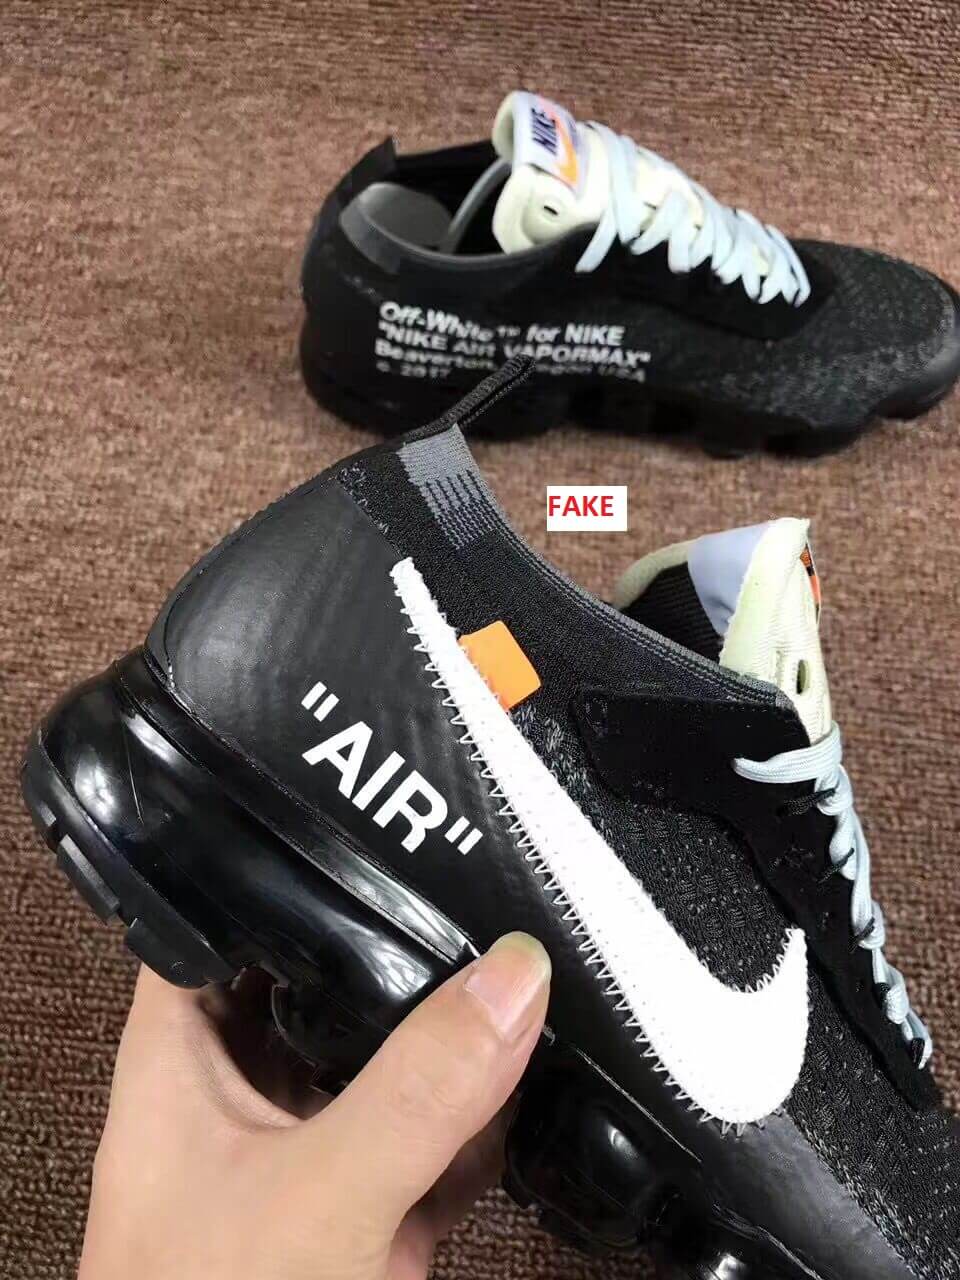 Fake Off White Nike Air Vapormax Sneakers 3 Arch Usa